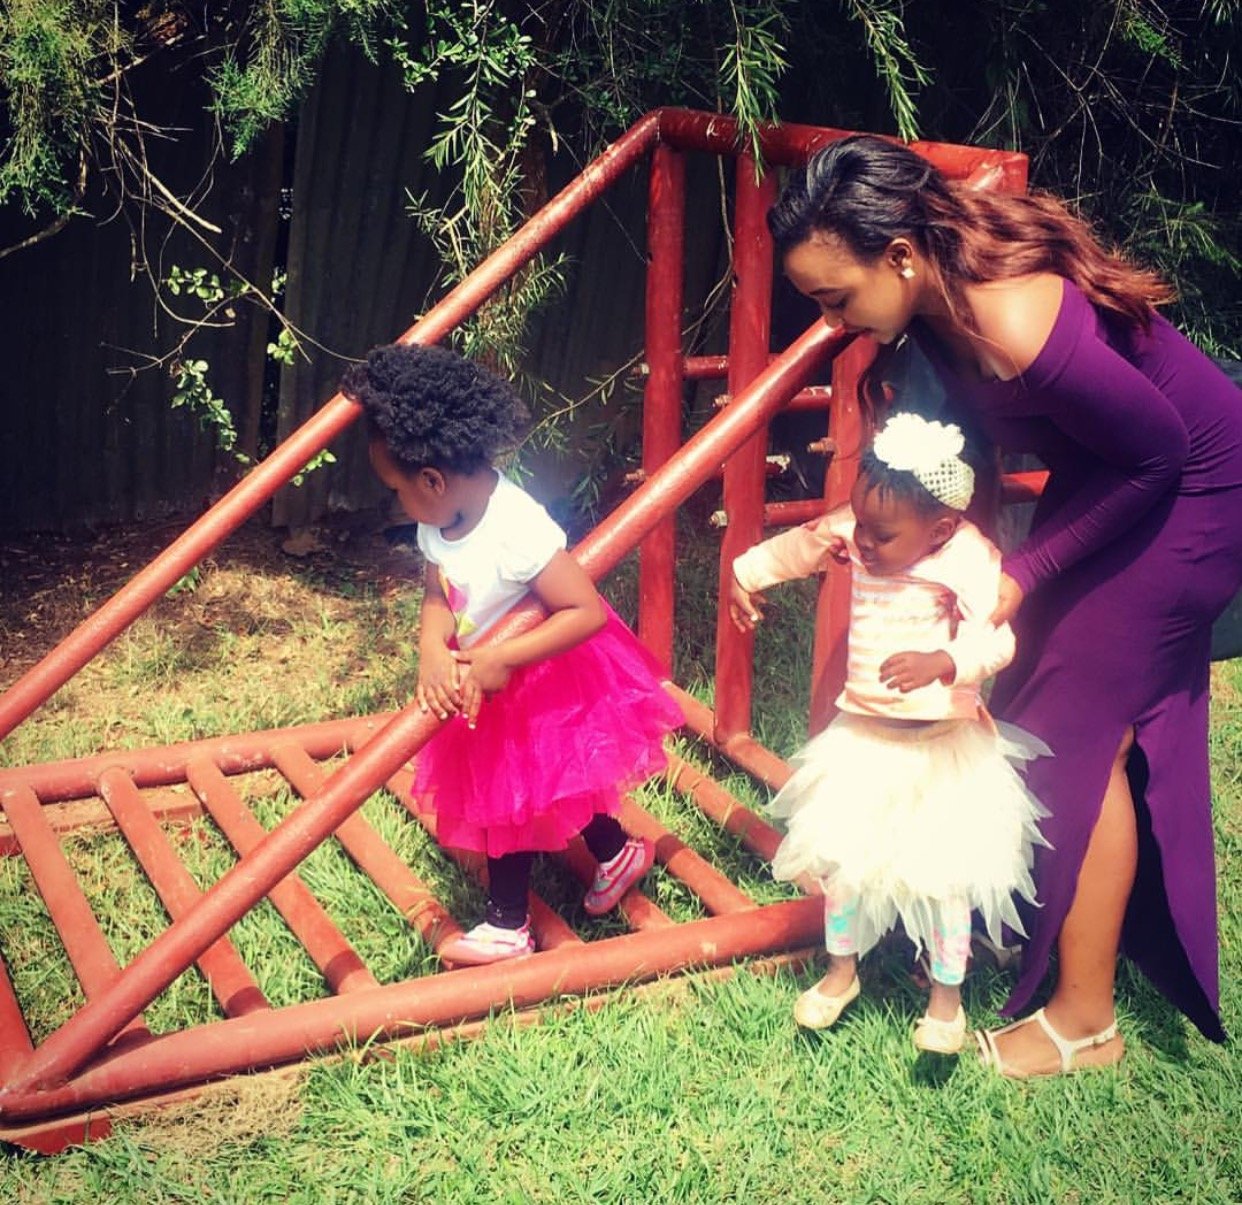 Betty Kyallo's 3 year old daughter steps out carrying a Chanel purse worth Ksh 90,000